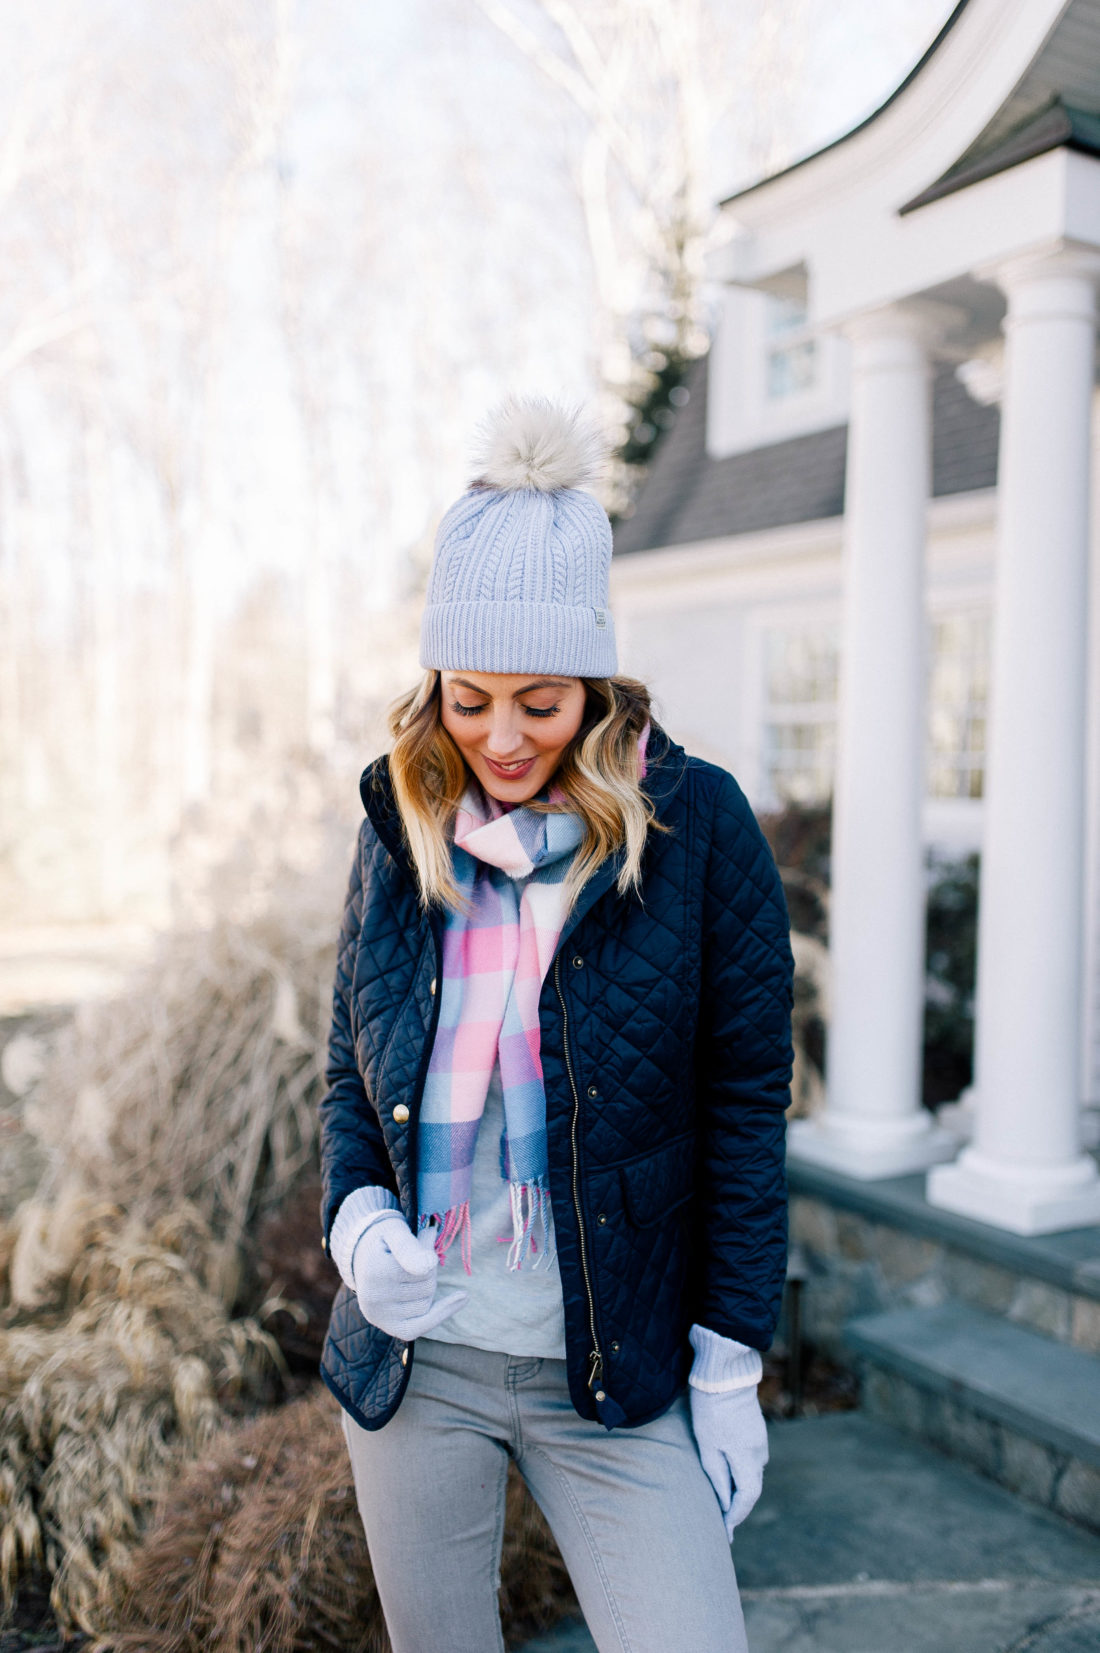 Eva Amurri Martino wears a navy quilted jacket, pastel plaid scarf and a pompom hat in the garden of her Connecticut home